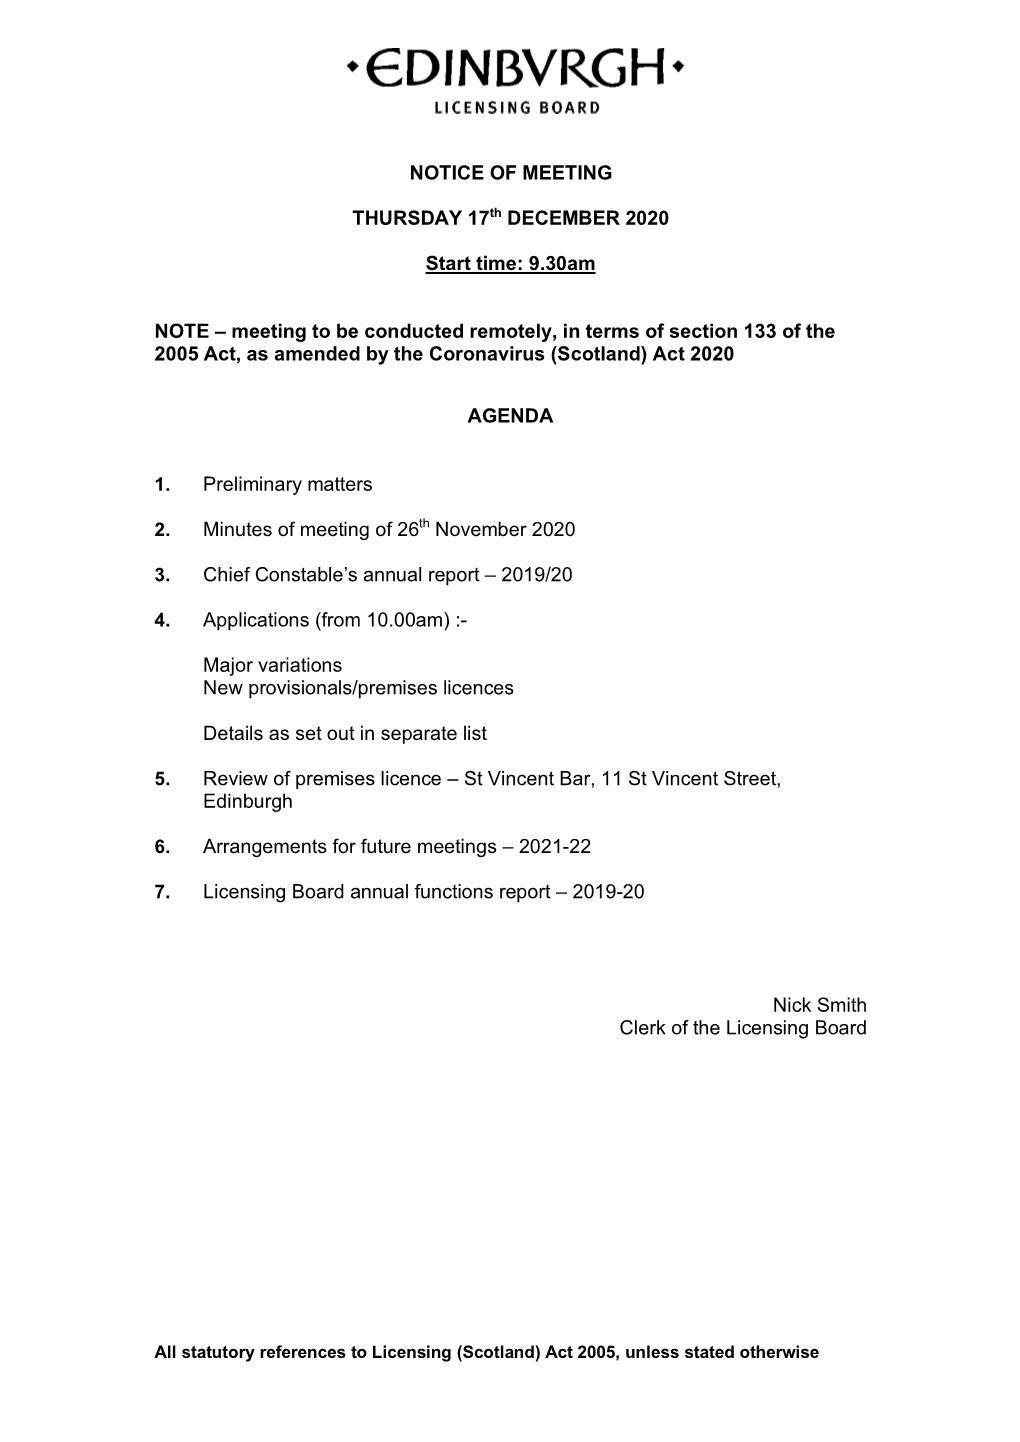 Licensing Board Annual Functions Report – 2019-20